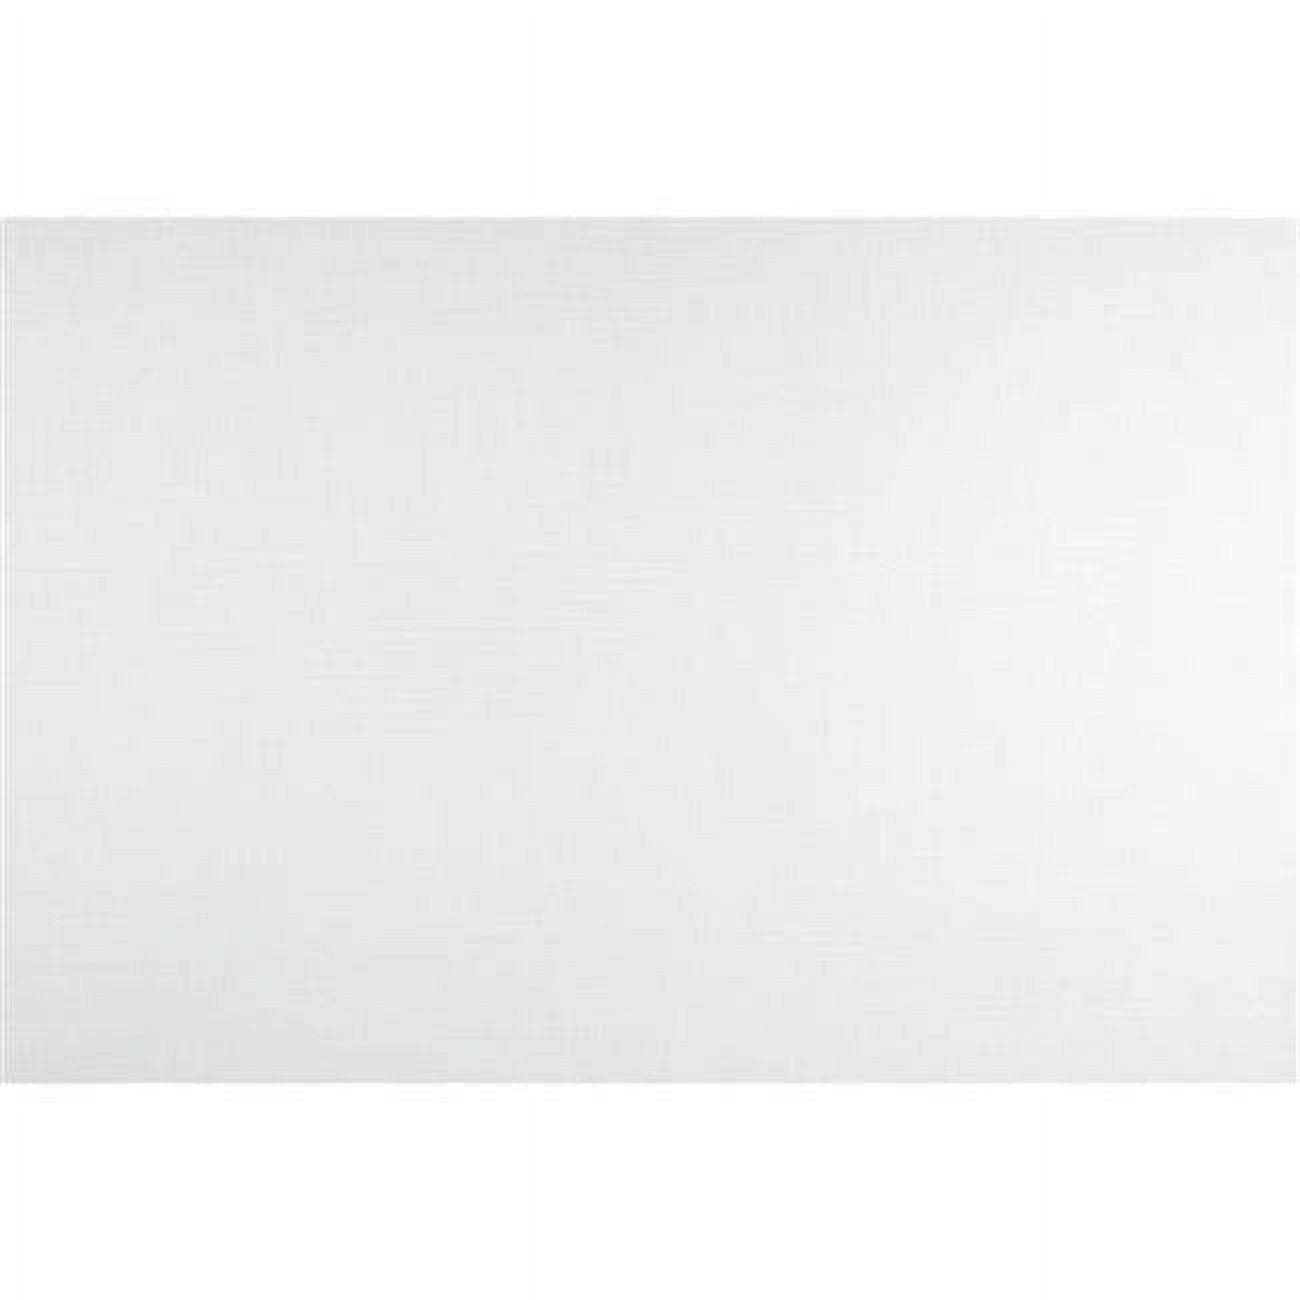 Picture of M-D Building Products 5020735 36 x 84 in. Aluminum Screen, Charcoal